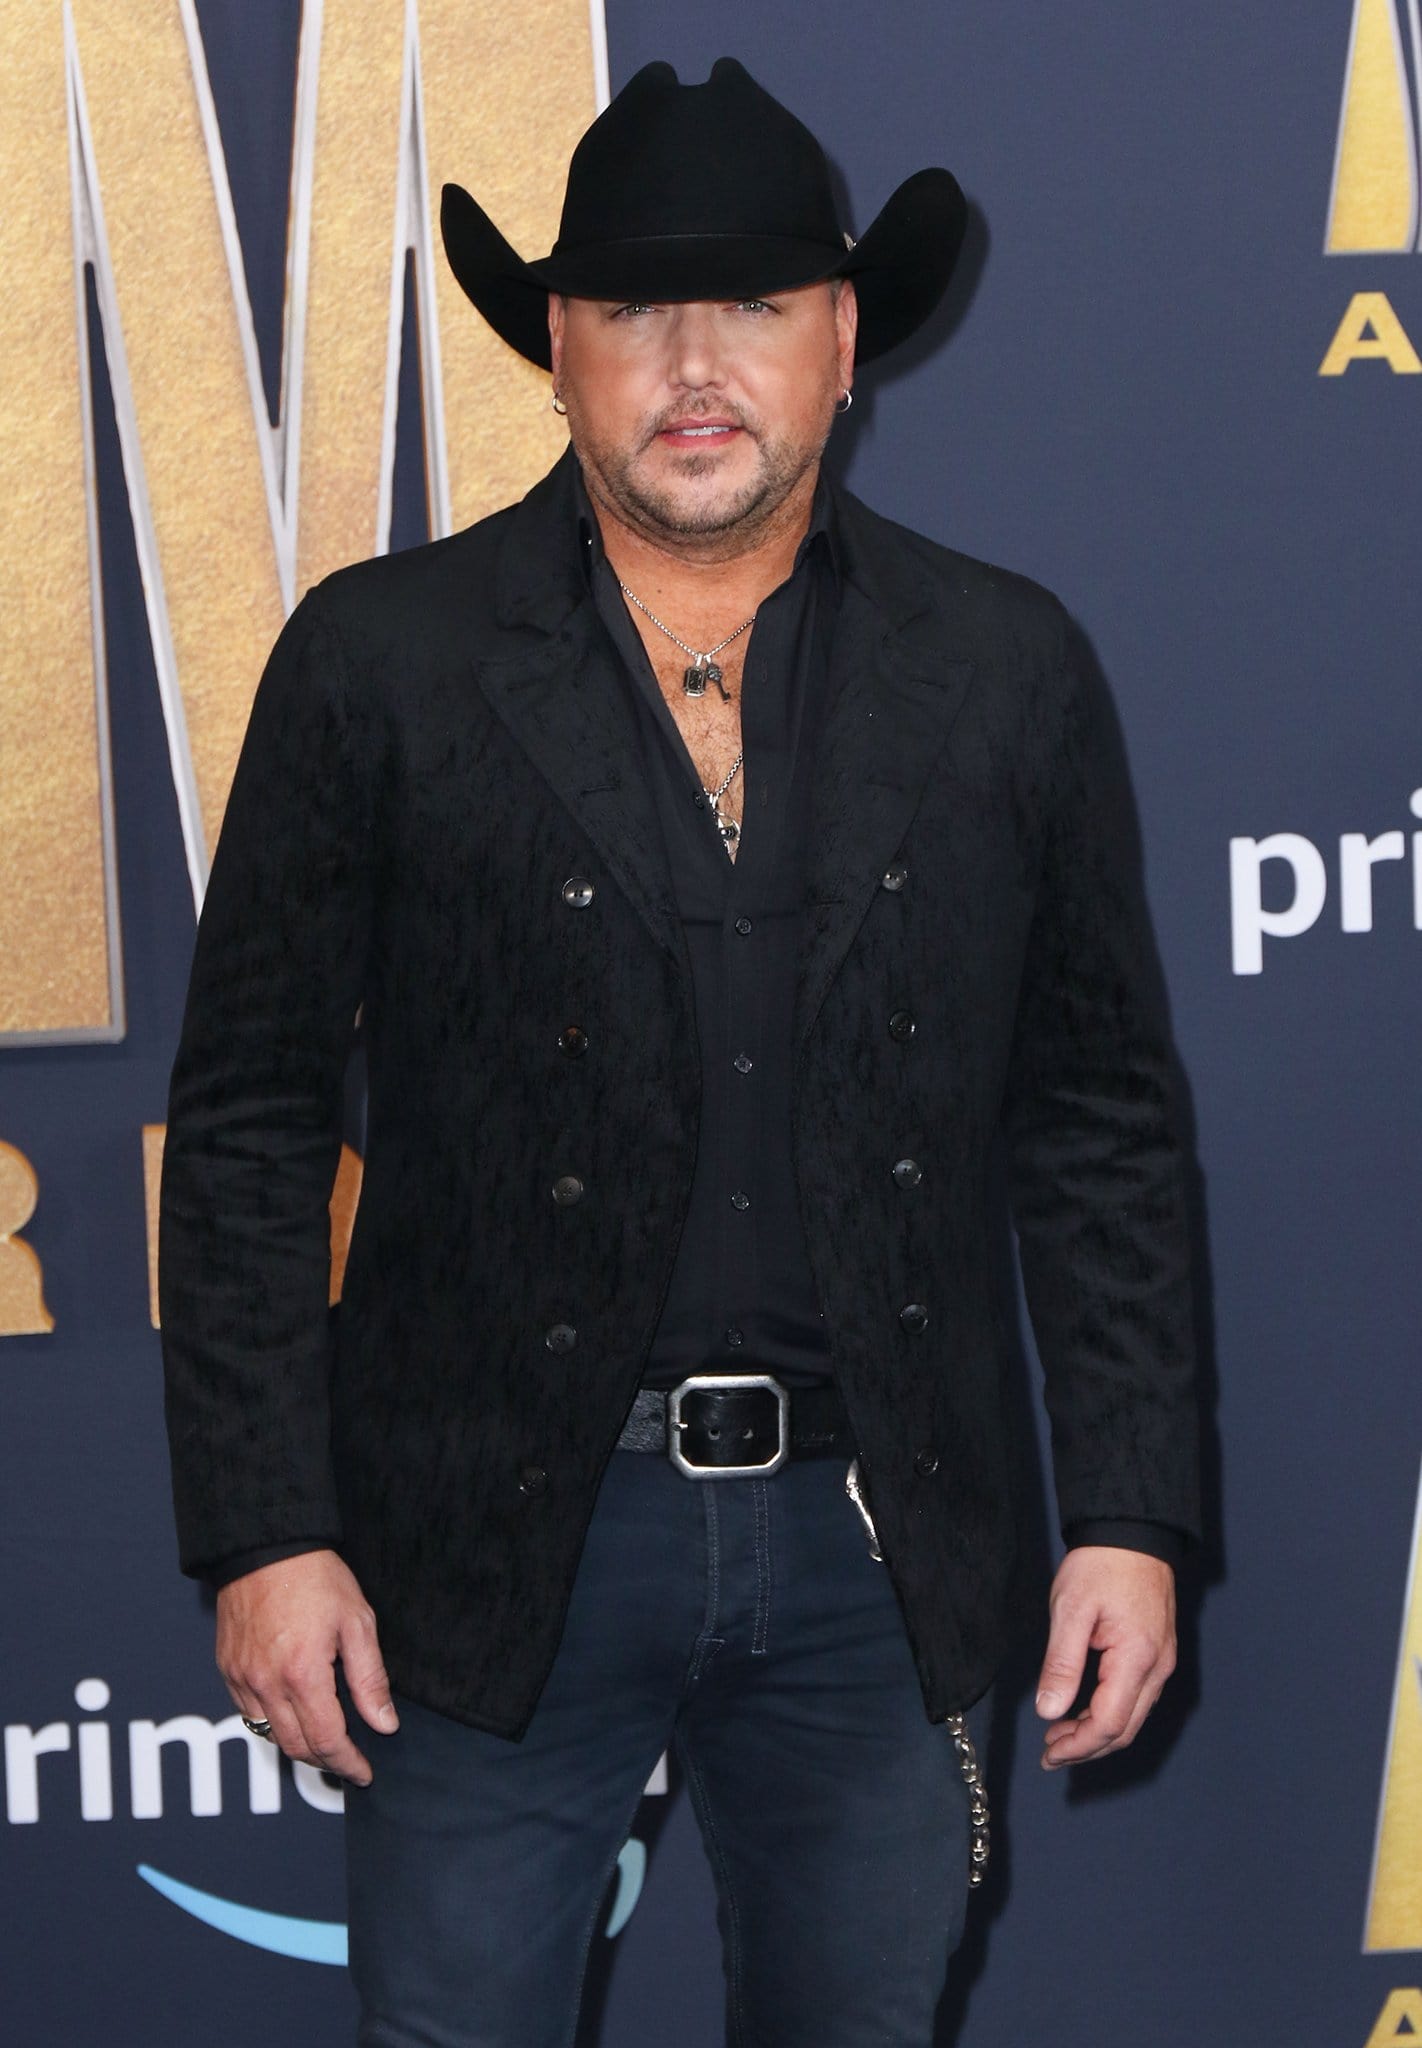 Seven of Jason Aldean's previous albums have been certified at least Platinum and 27 of his 38 singles have reached #1 on either the Hot Country Songs or Country Airplay charts